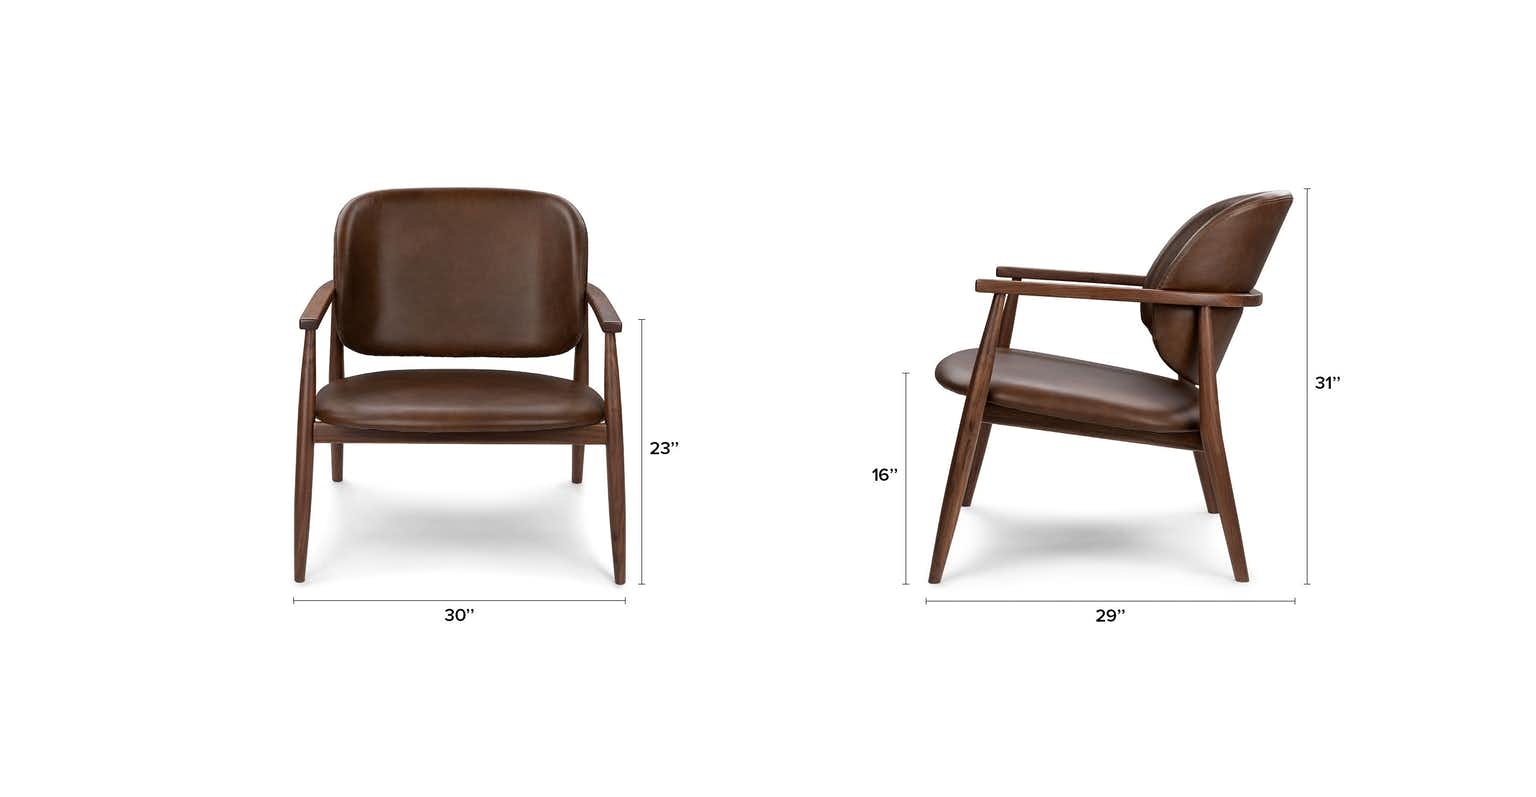 Levo brown leather lounge chair - Image 1